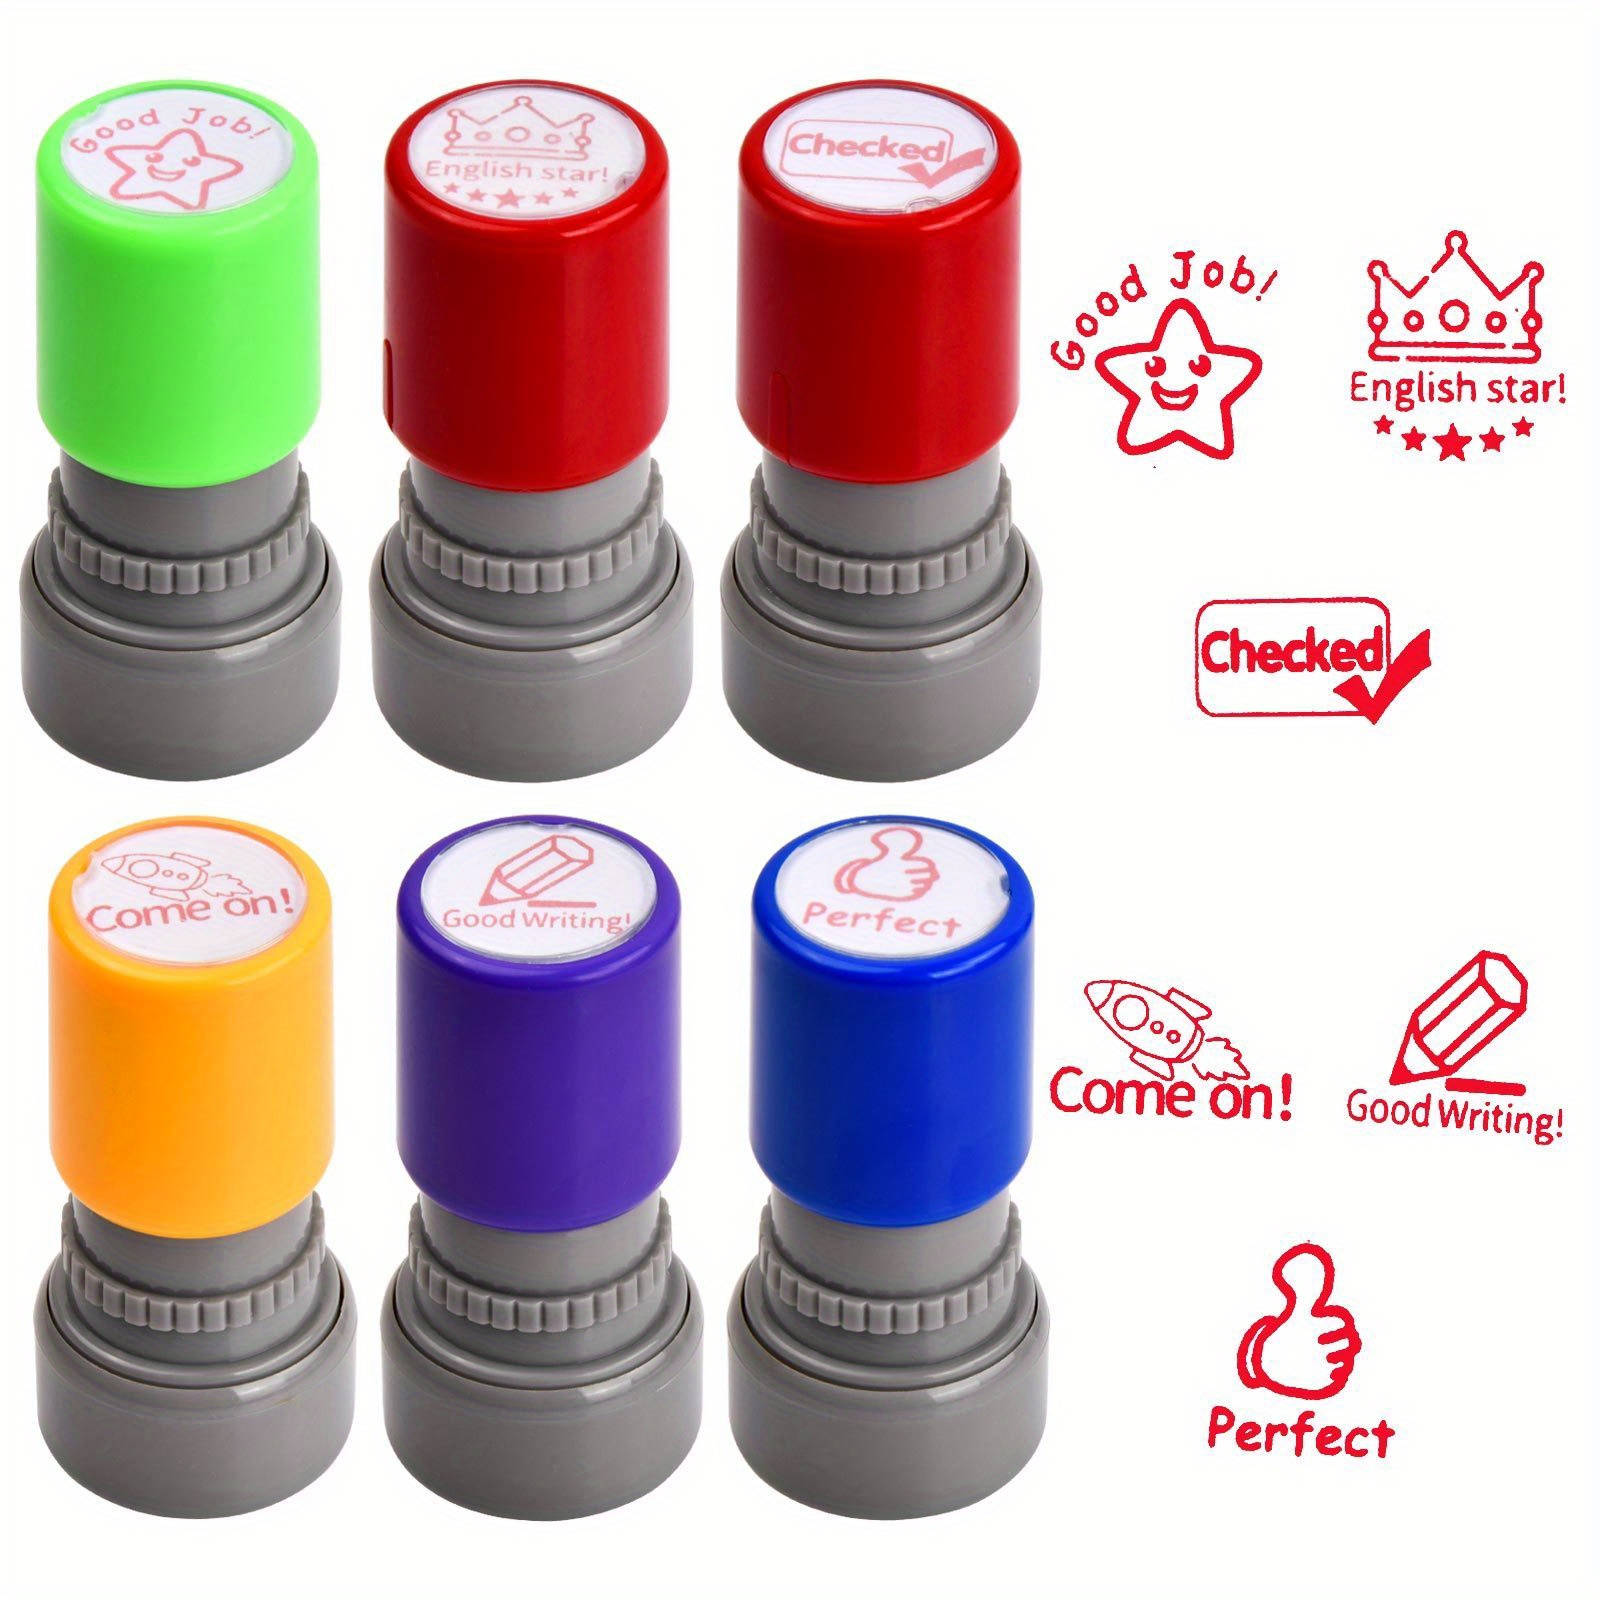 Stamp Enjoy Self-ink Flash Stamp Set, Multicolor Teacher Stamps, Office  Stationery Stamps, Pre-inked, and Premium Ink Refill 